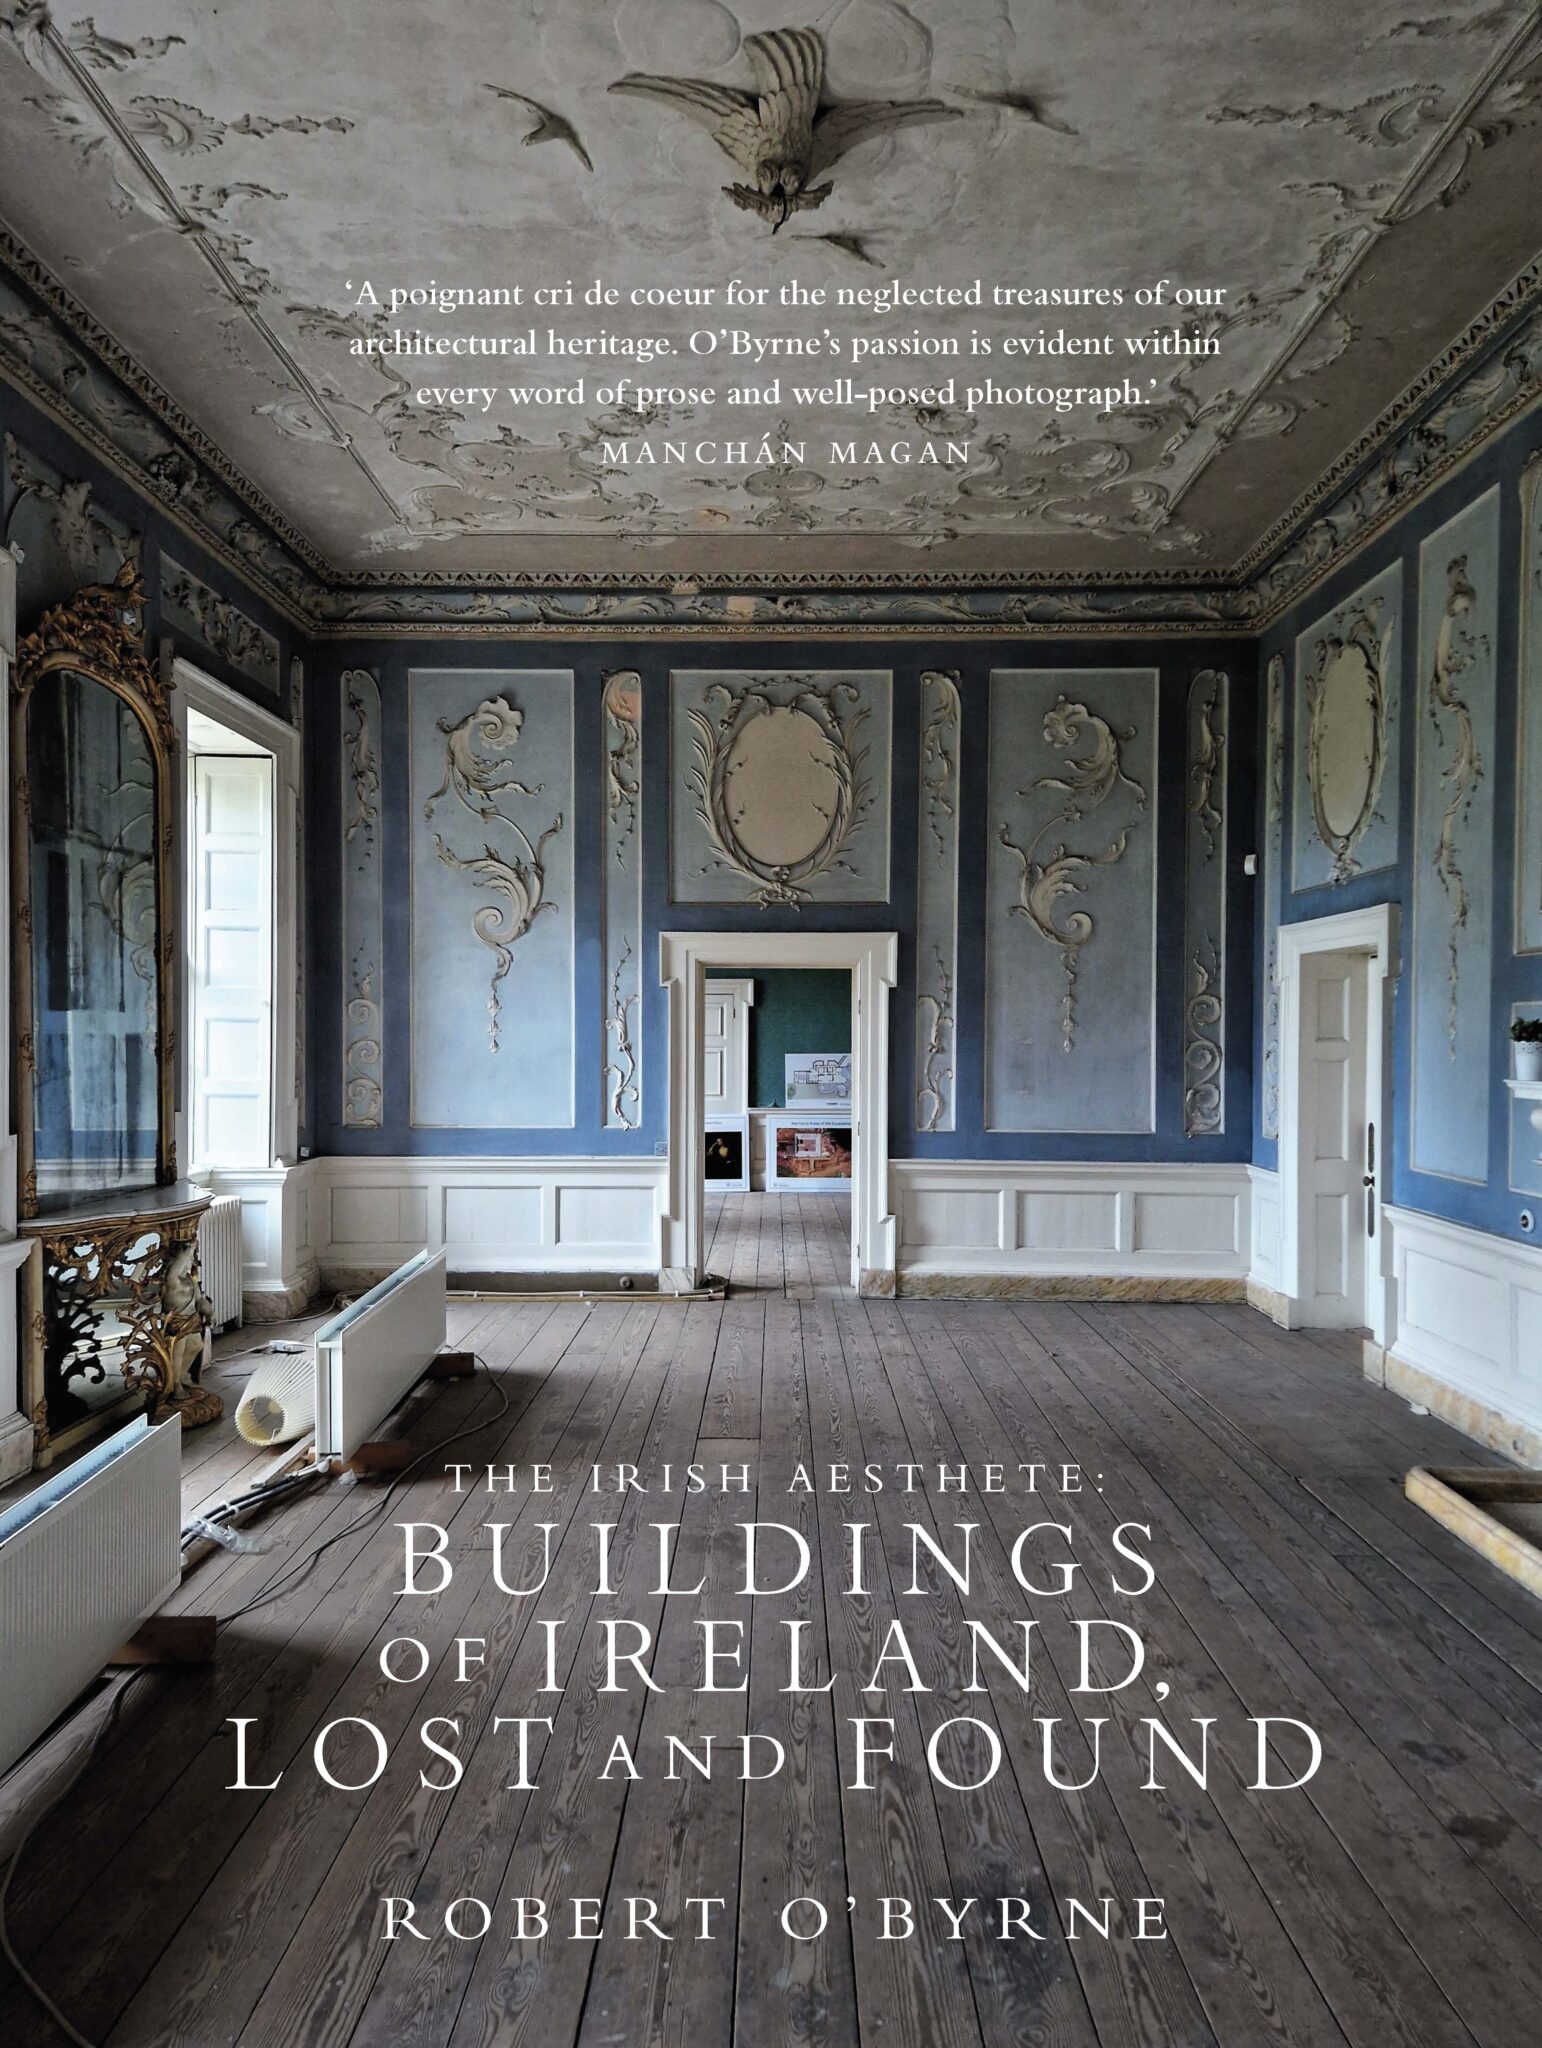 The Irish Aesthete: Buildings of Ireland, Lost and Found by Robert O'Byrne